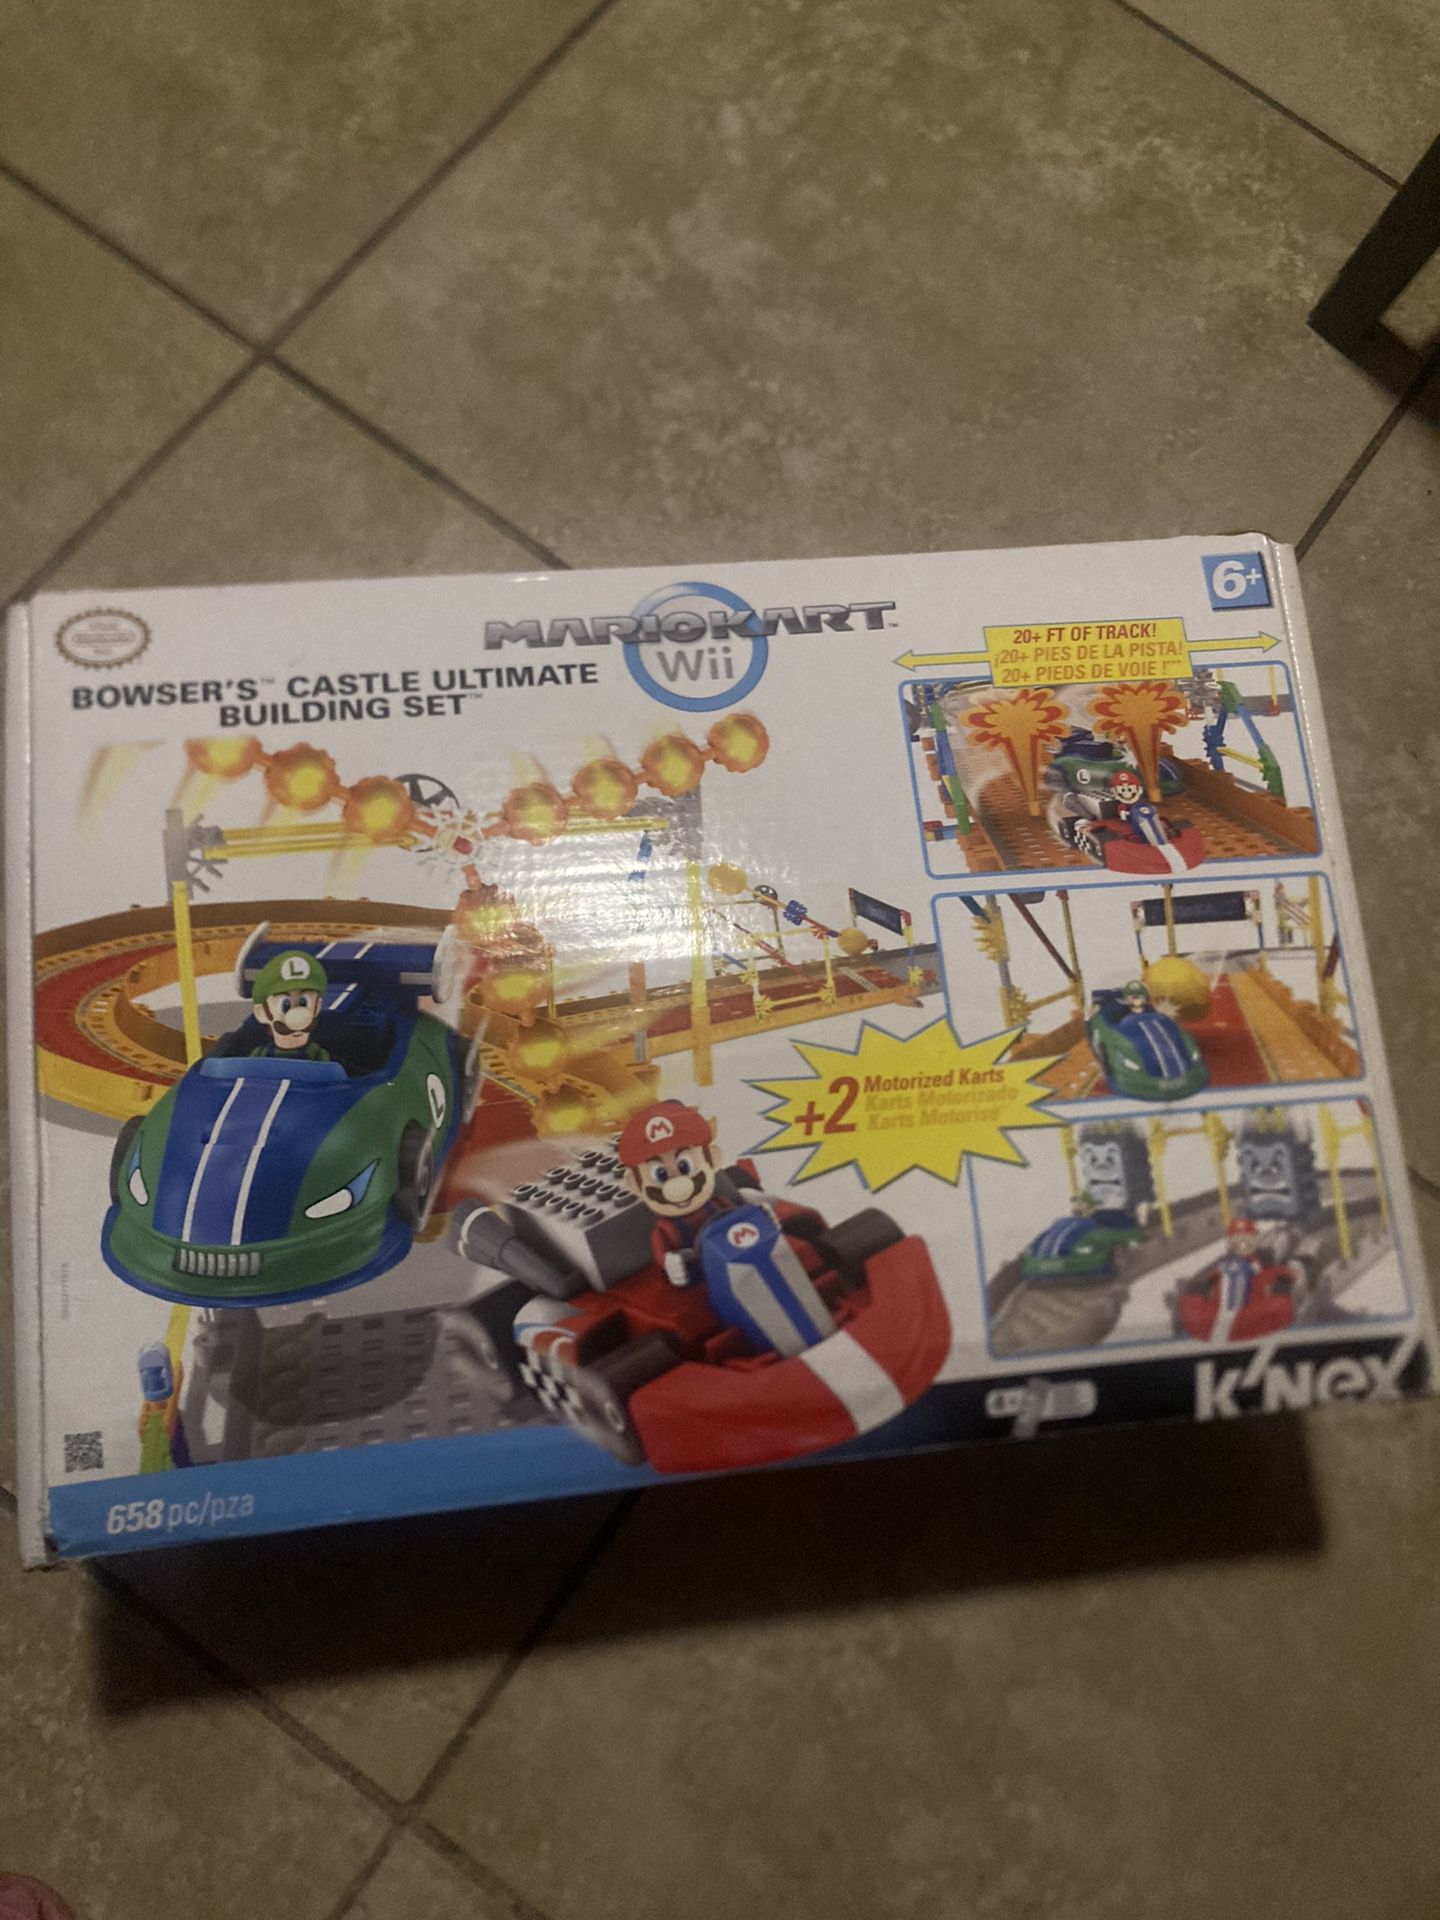 Mariokart Wii Bowsers Castle Ultimate Building Set